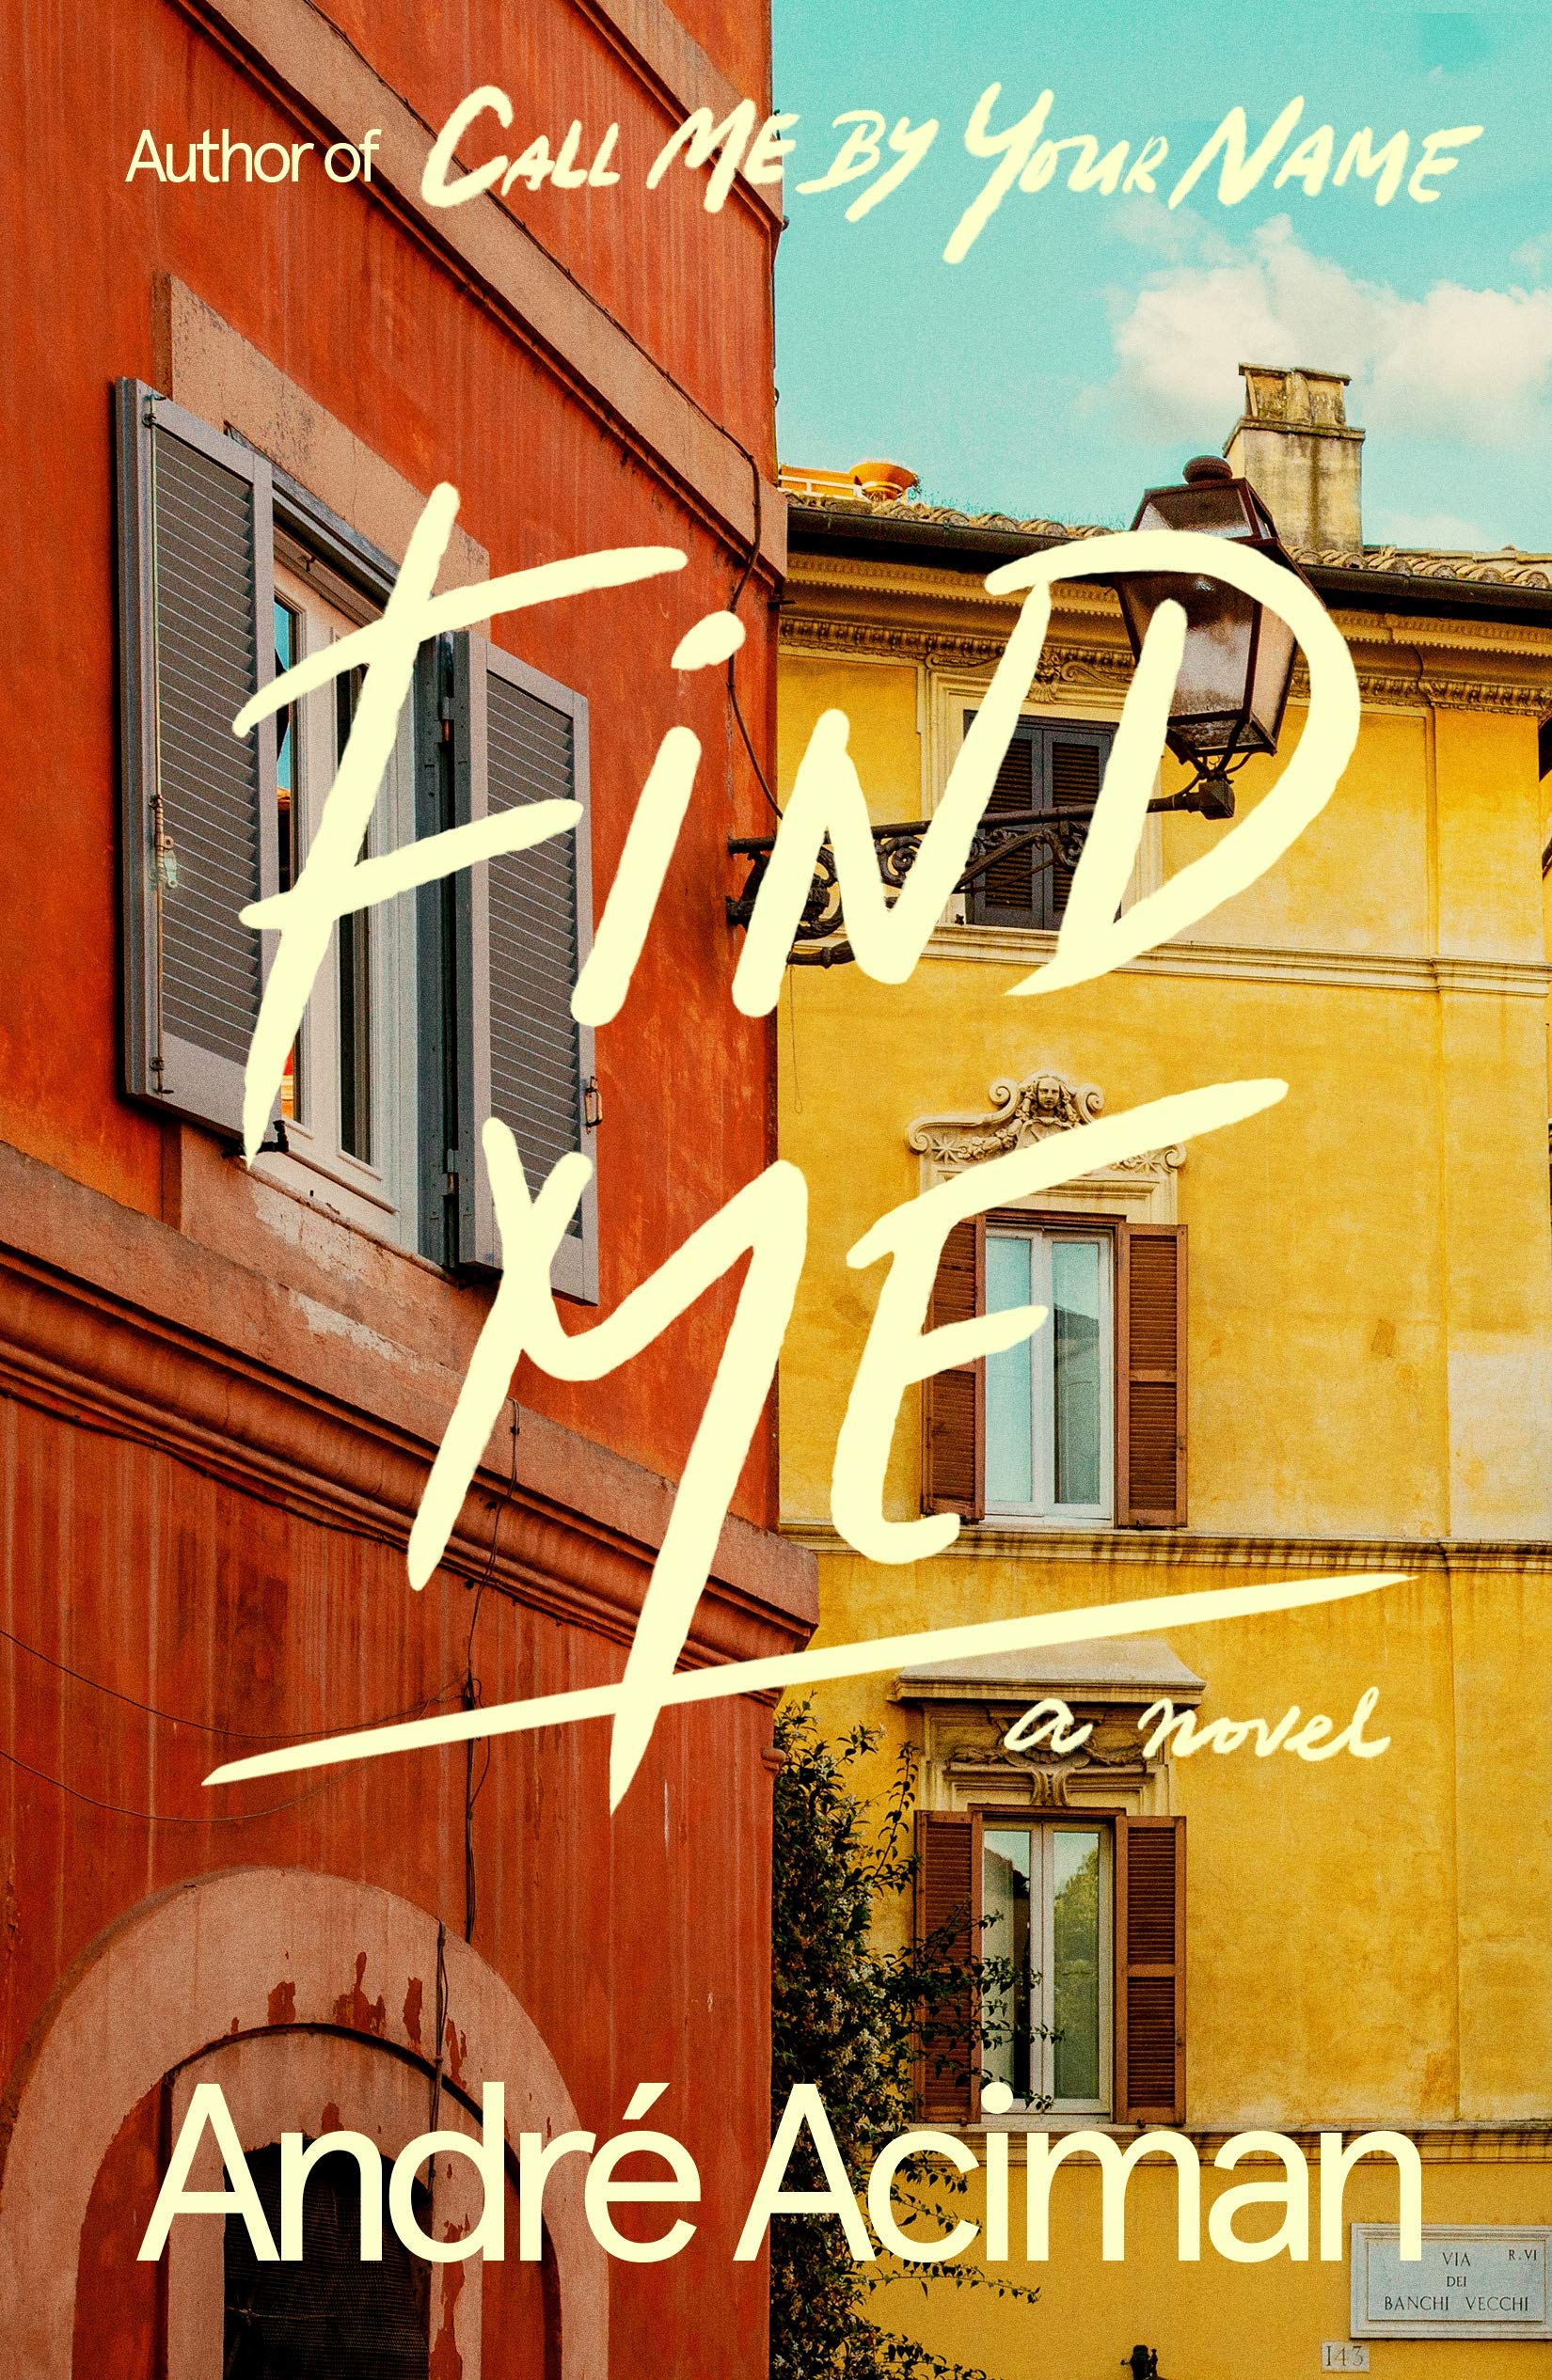 The cover of Find Me